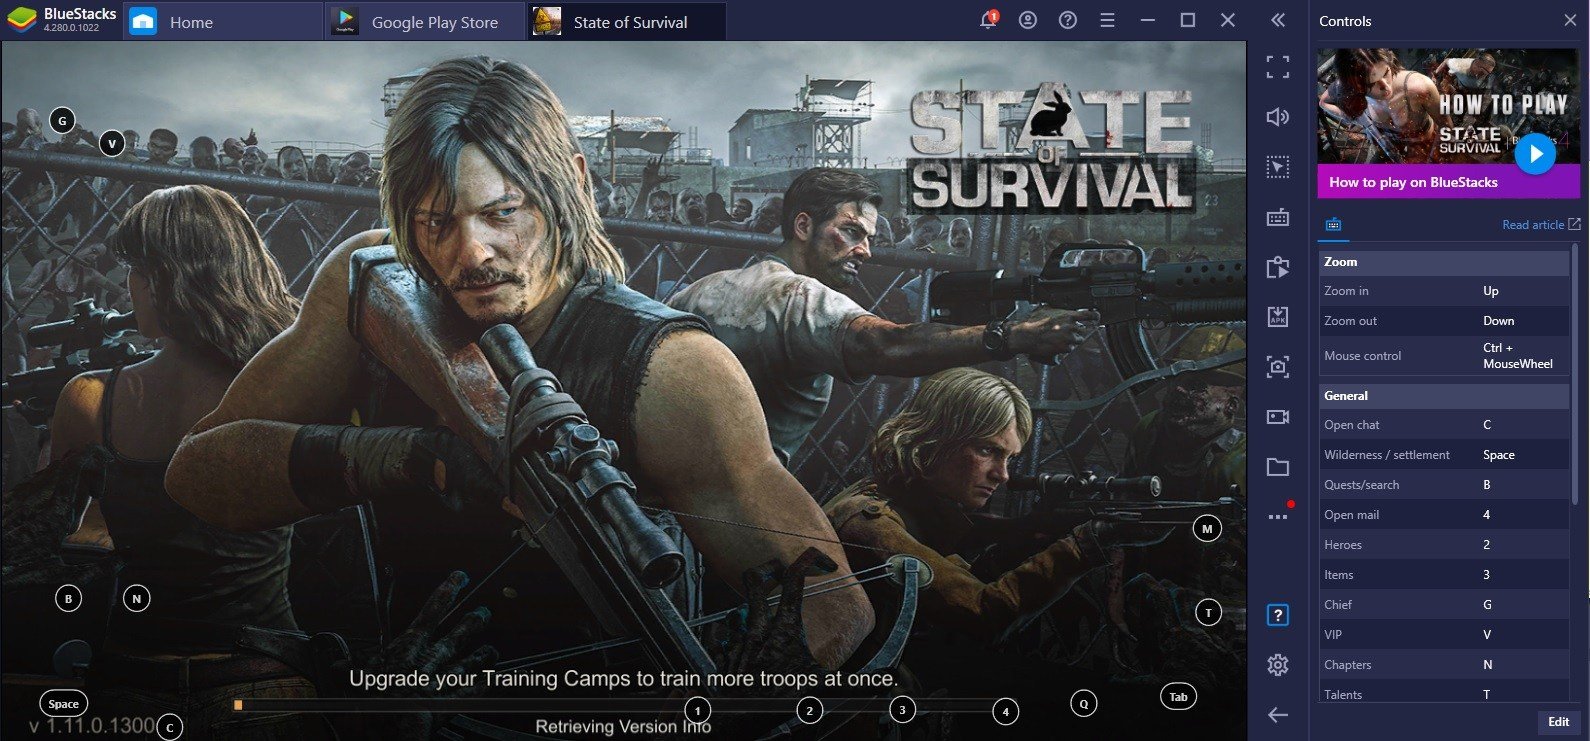 State of Survival : The Walking Dead Collaboration : Comment trouver Daryl Dixon